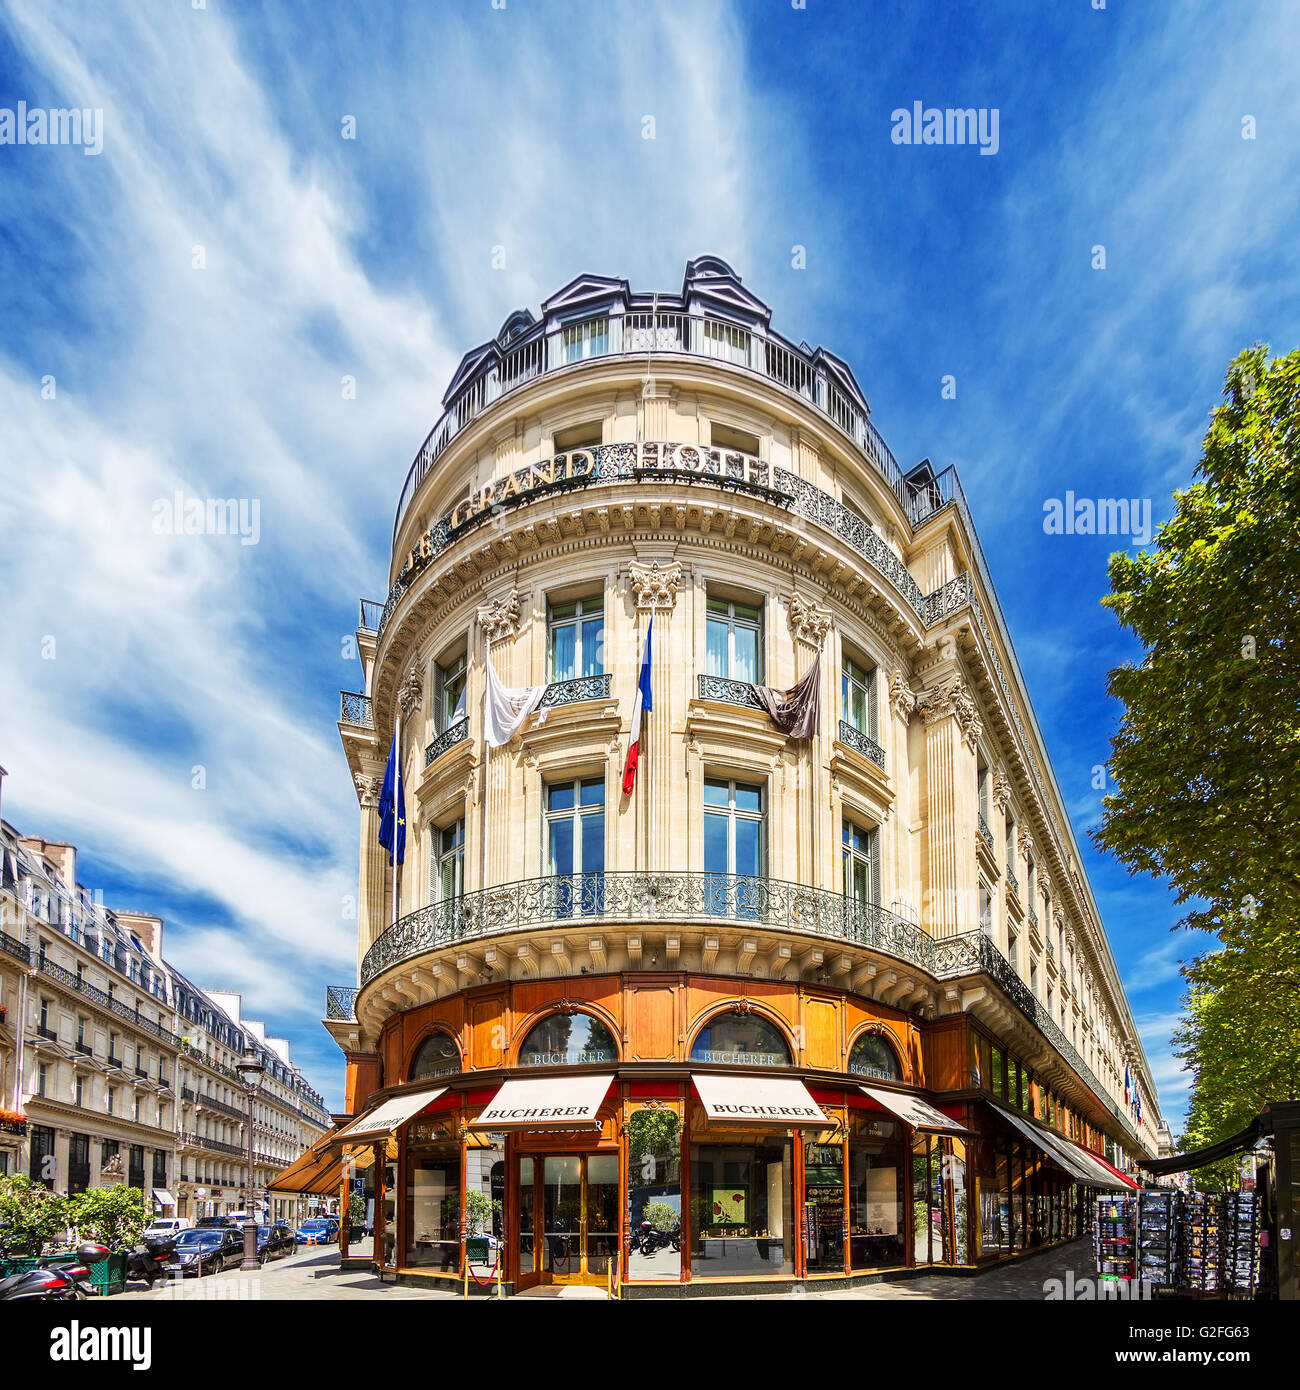 Le Grand Hotel in Paris. French architecture. Tourism monument. Stock Photo